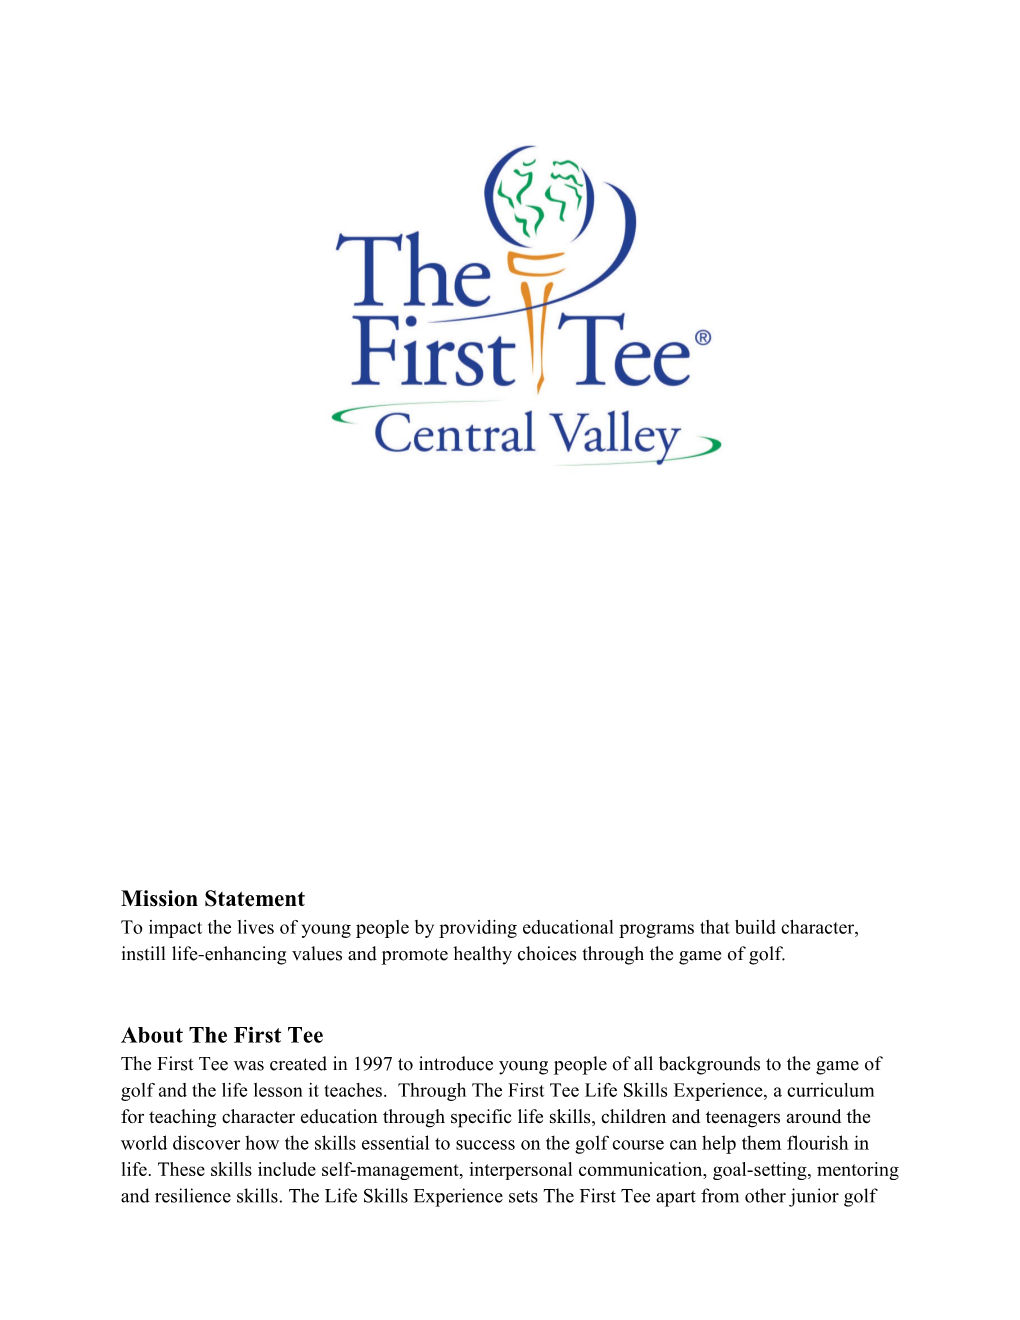 About the First Tee